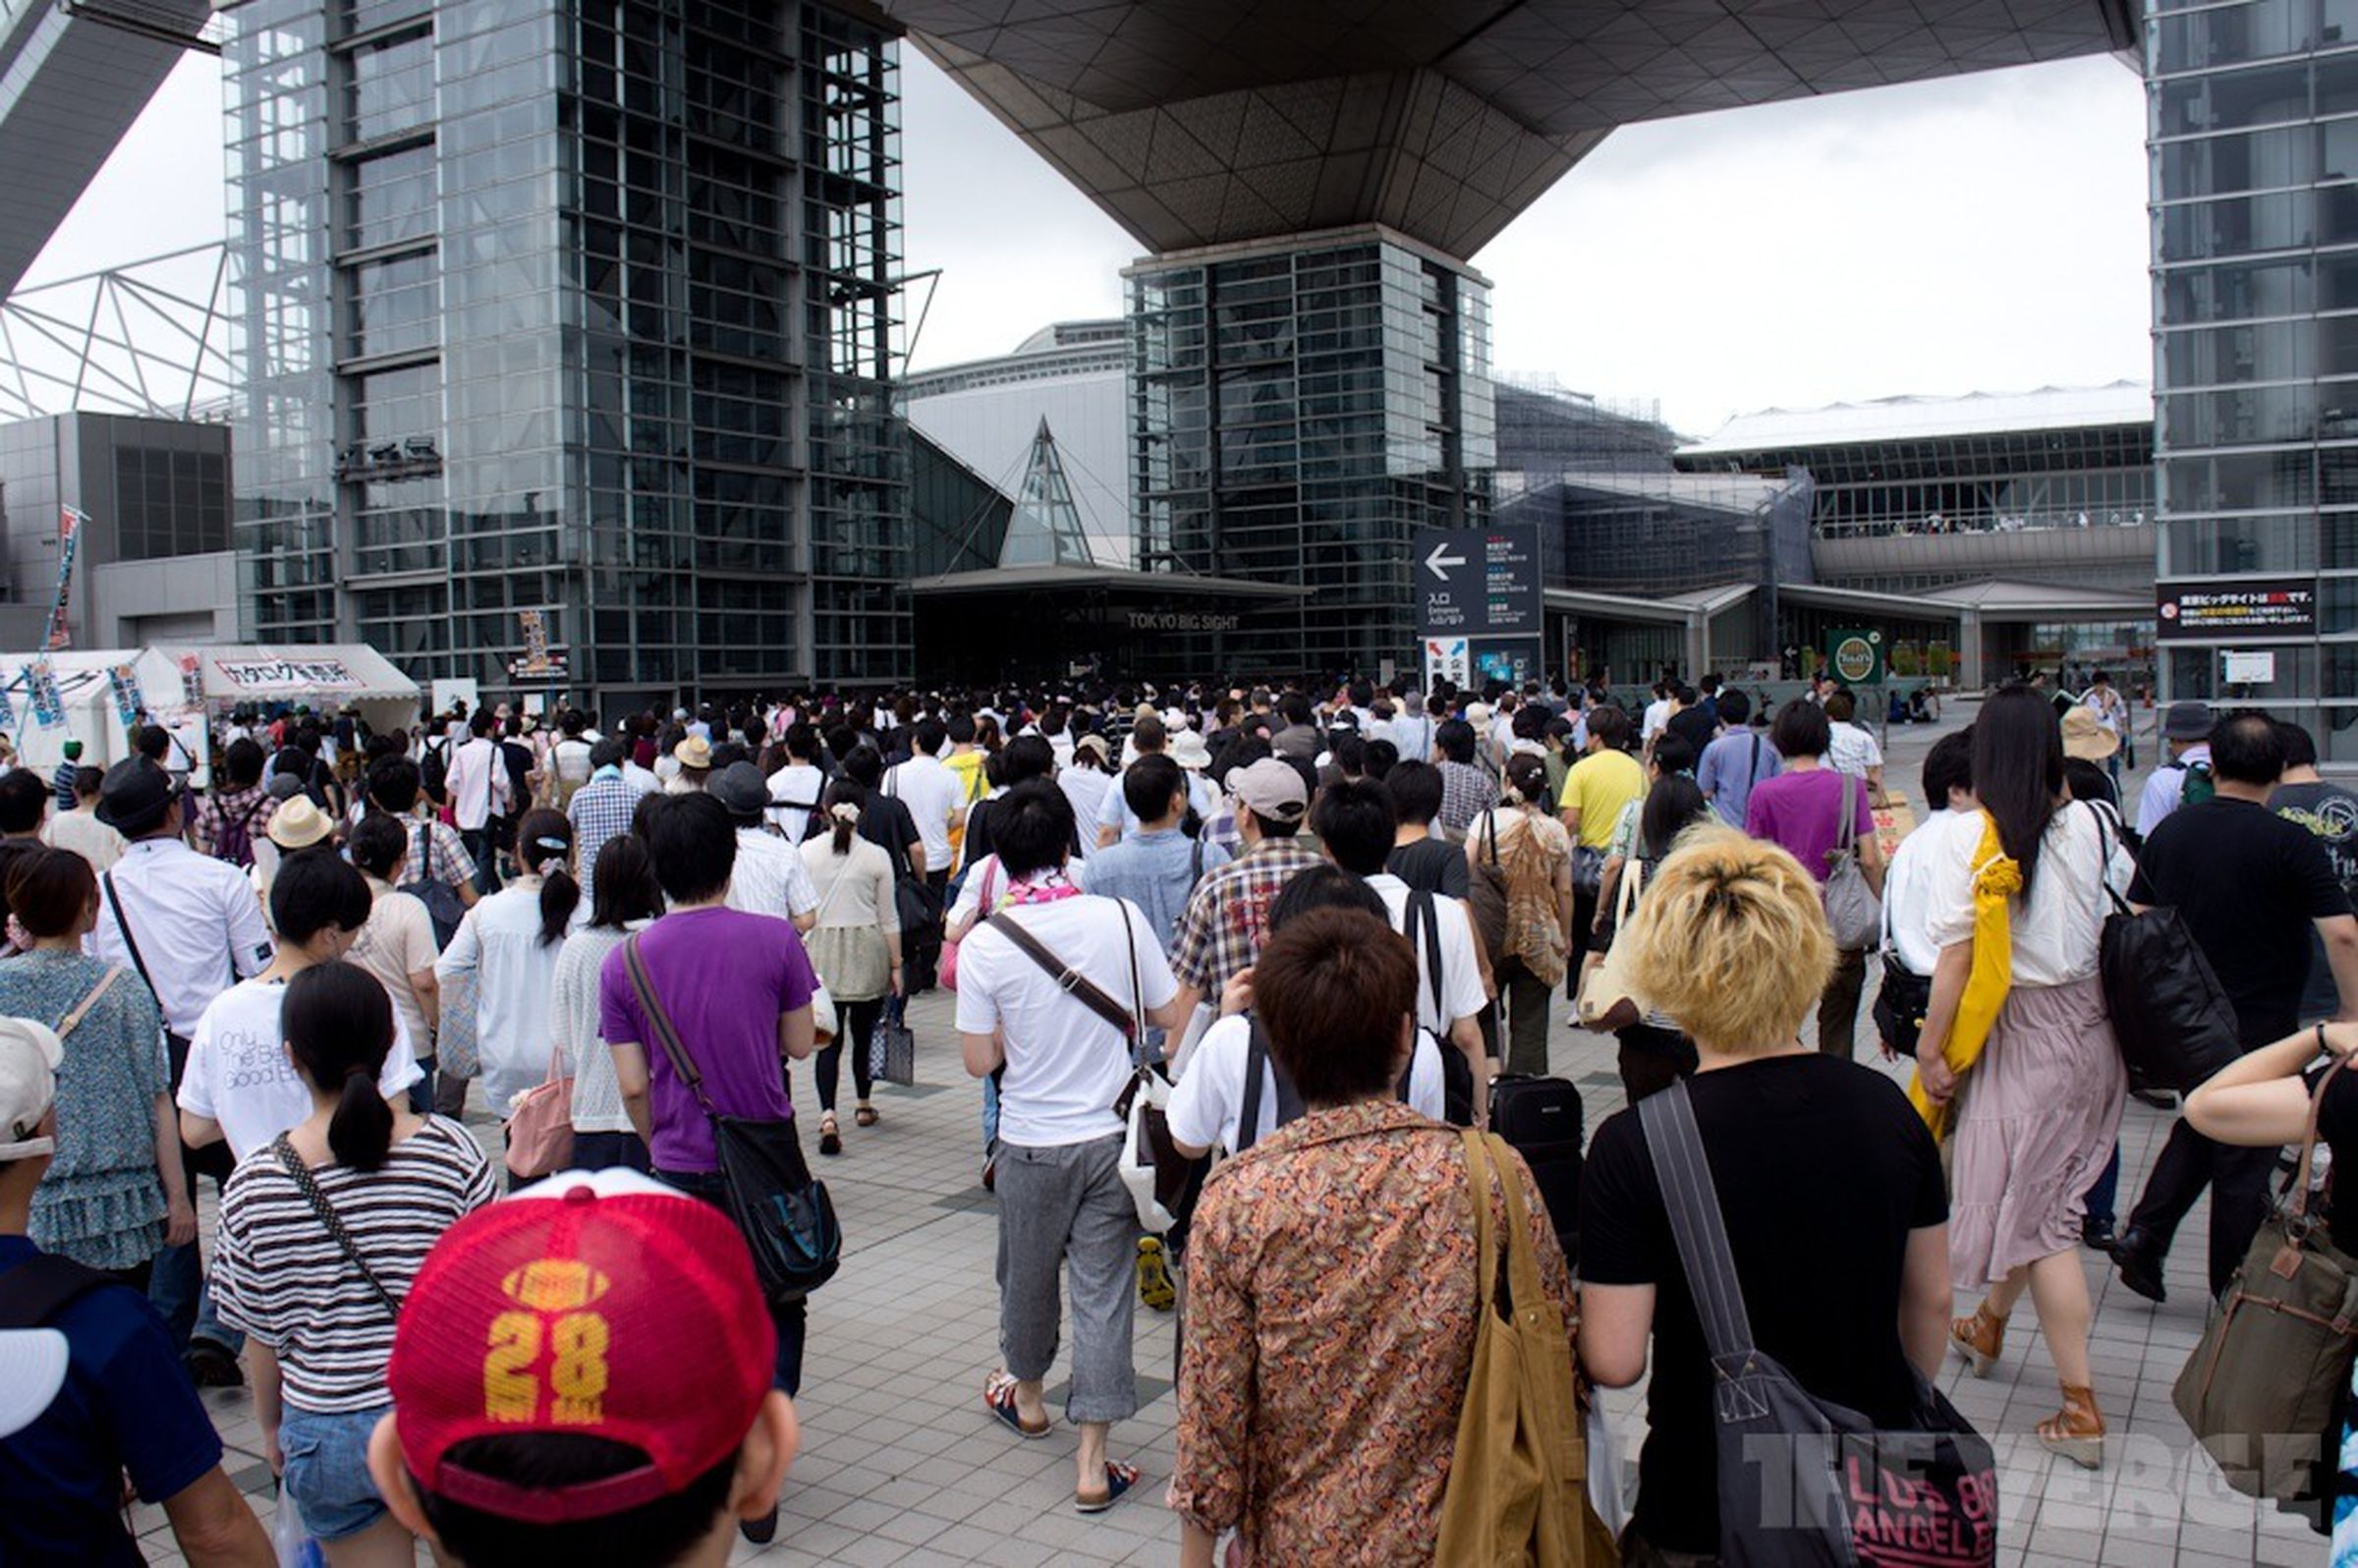 Inside Comiket